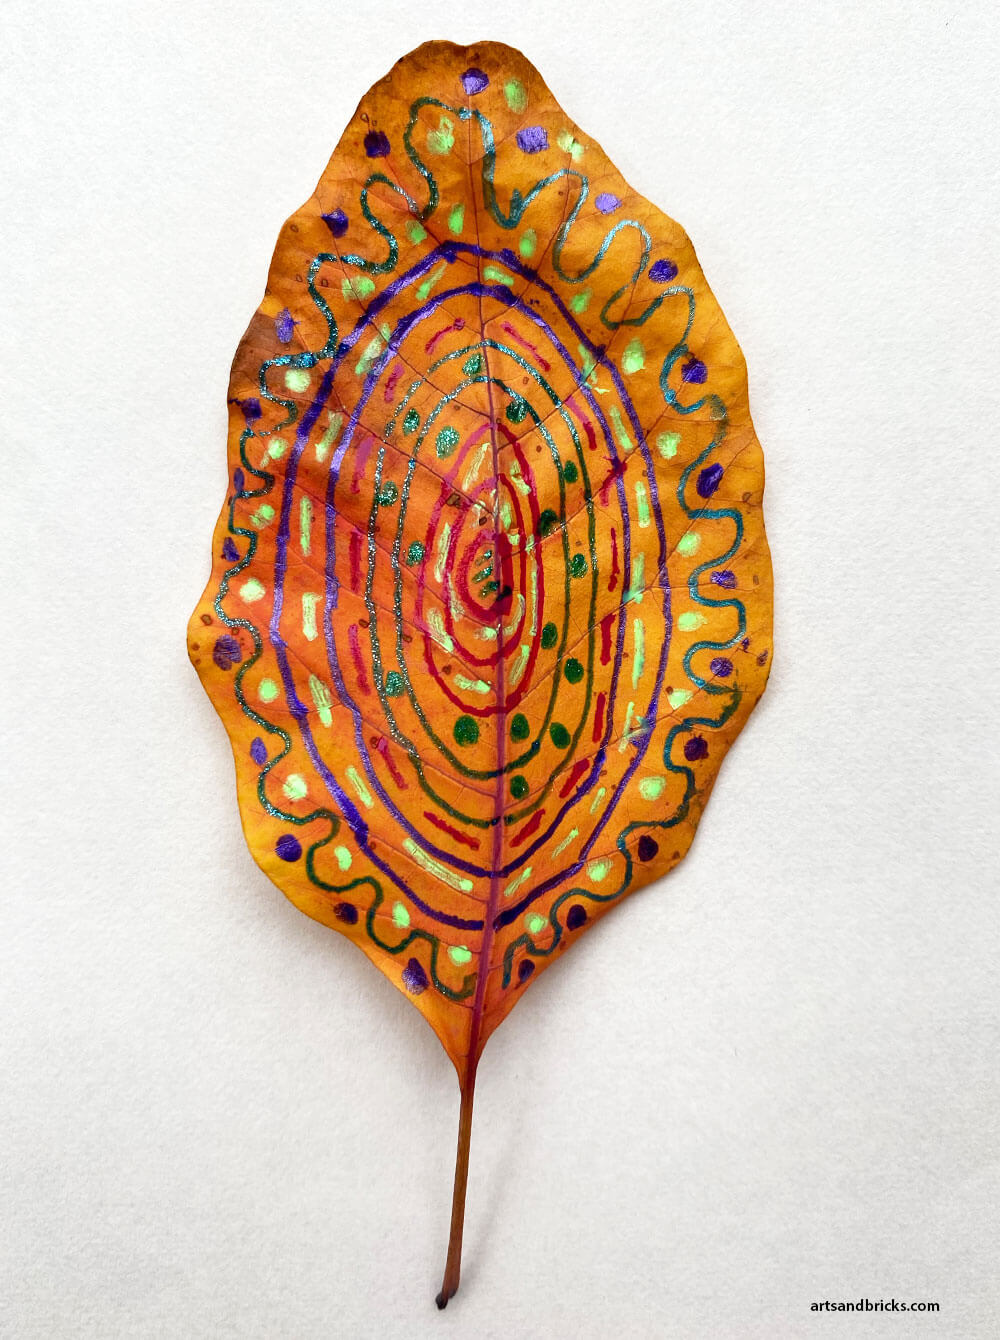 Create exquisite patterned and decorated fall leaves by doodling with gel pens. It's hours of relaxing, creative fun! No setup required - just leaves, gel pens and perhaps some good music. It's an autumn craft that both you and your kids will love! #fall #leaves #kidscraft #autumn #halloween #crafts #artsandcrafts